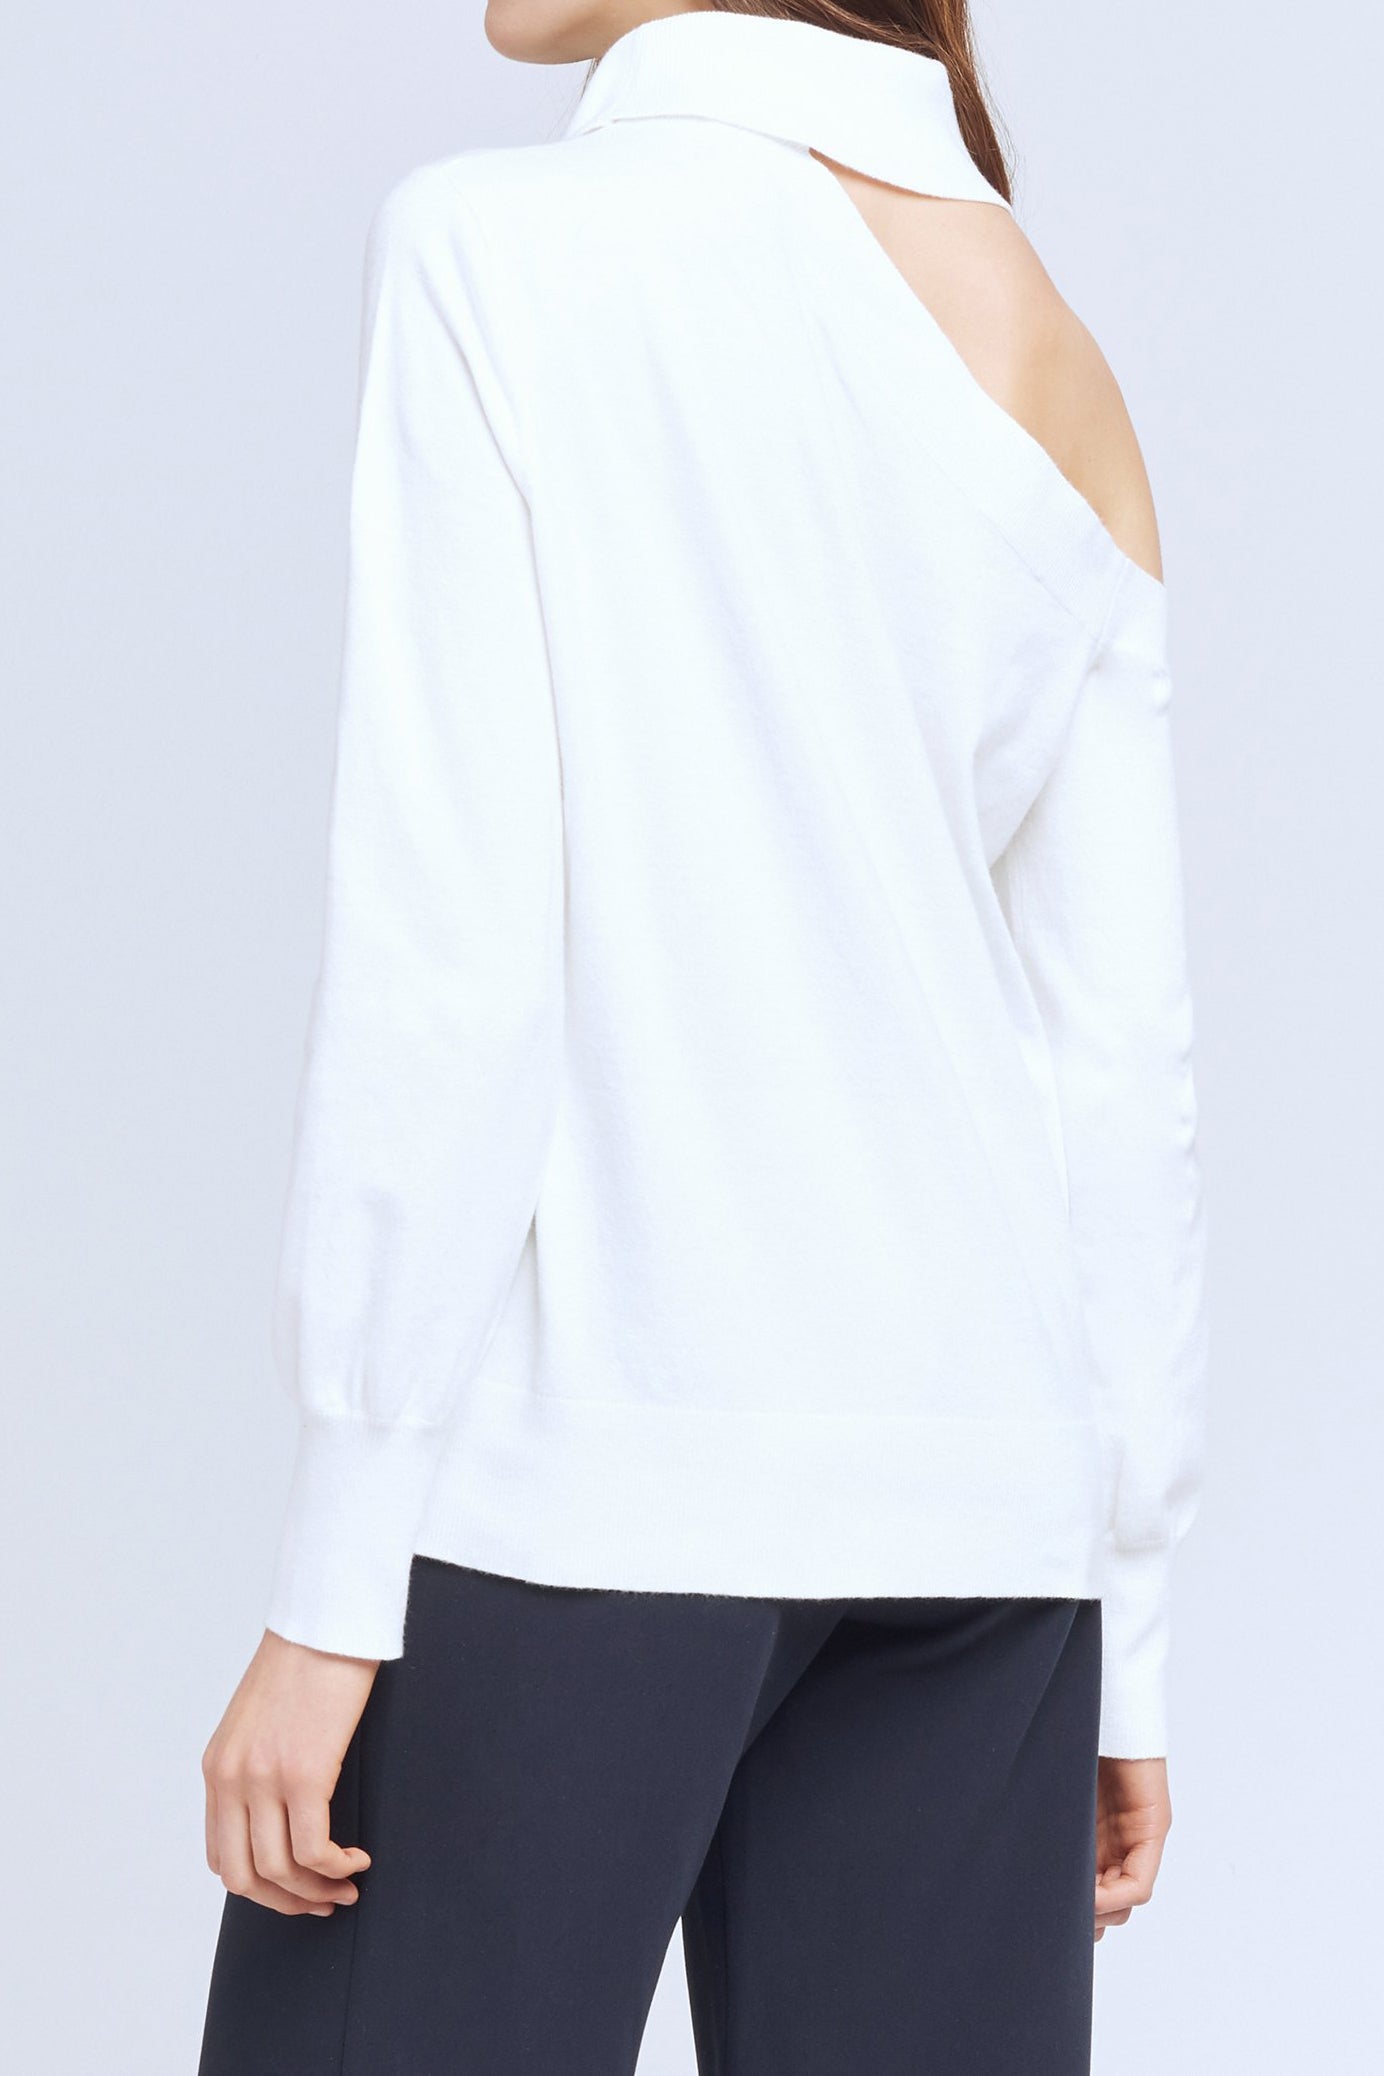 L'AGENCE Easton One Shoulder Sweater in Ivory